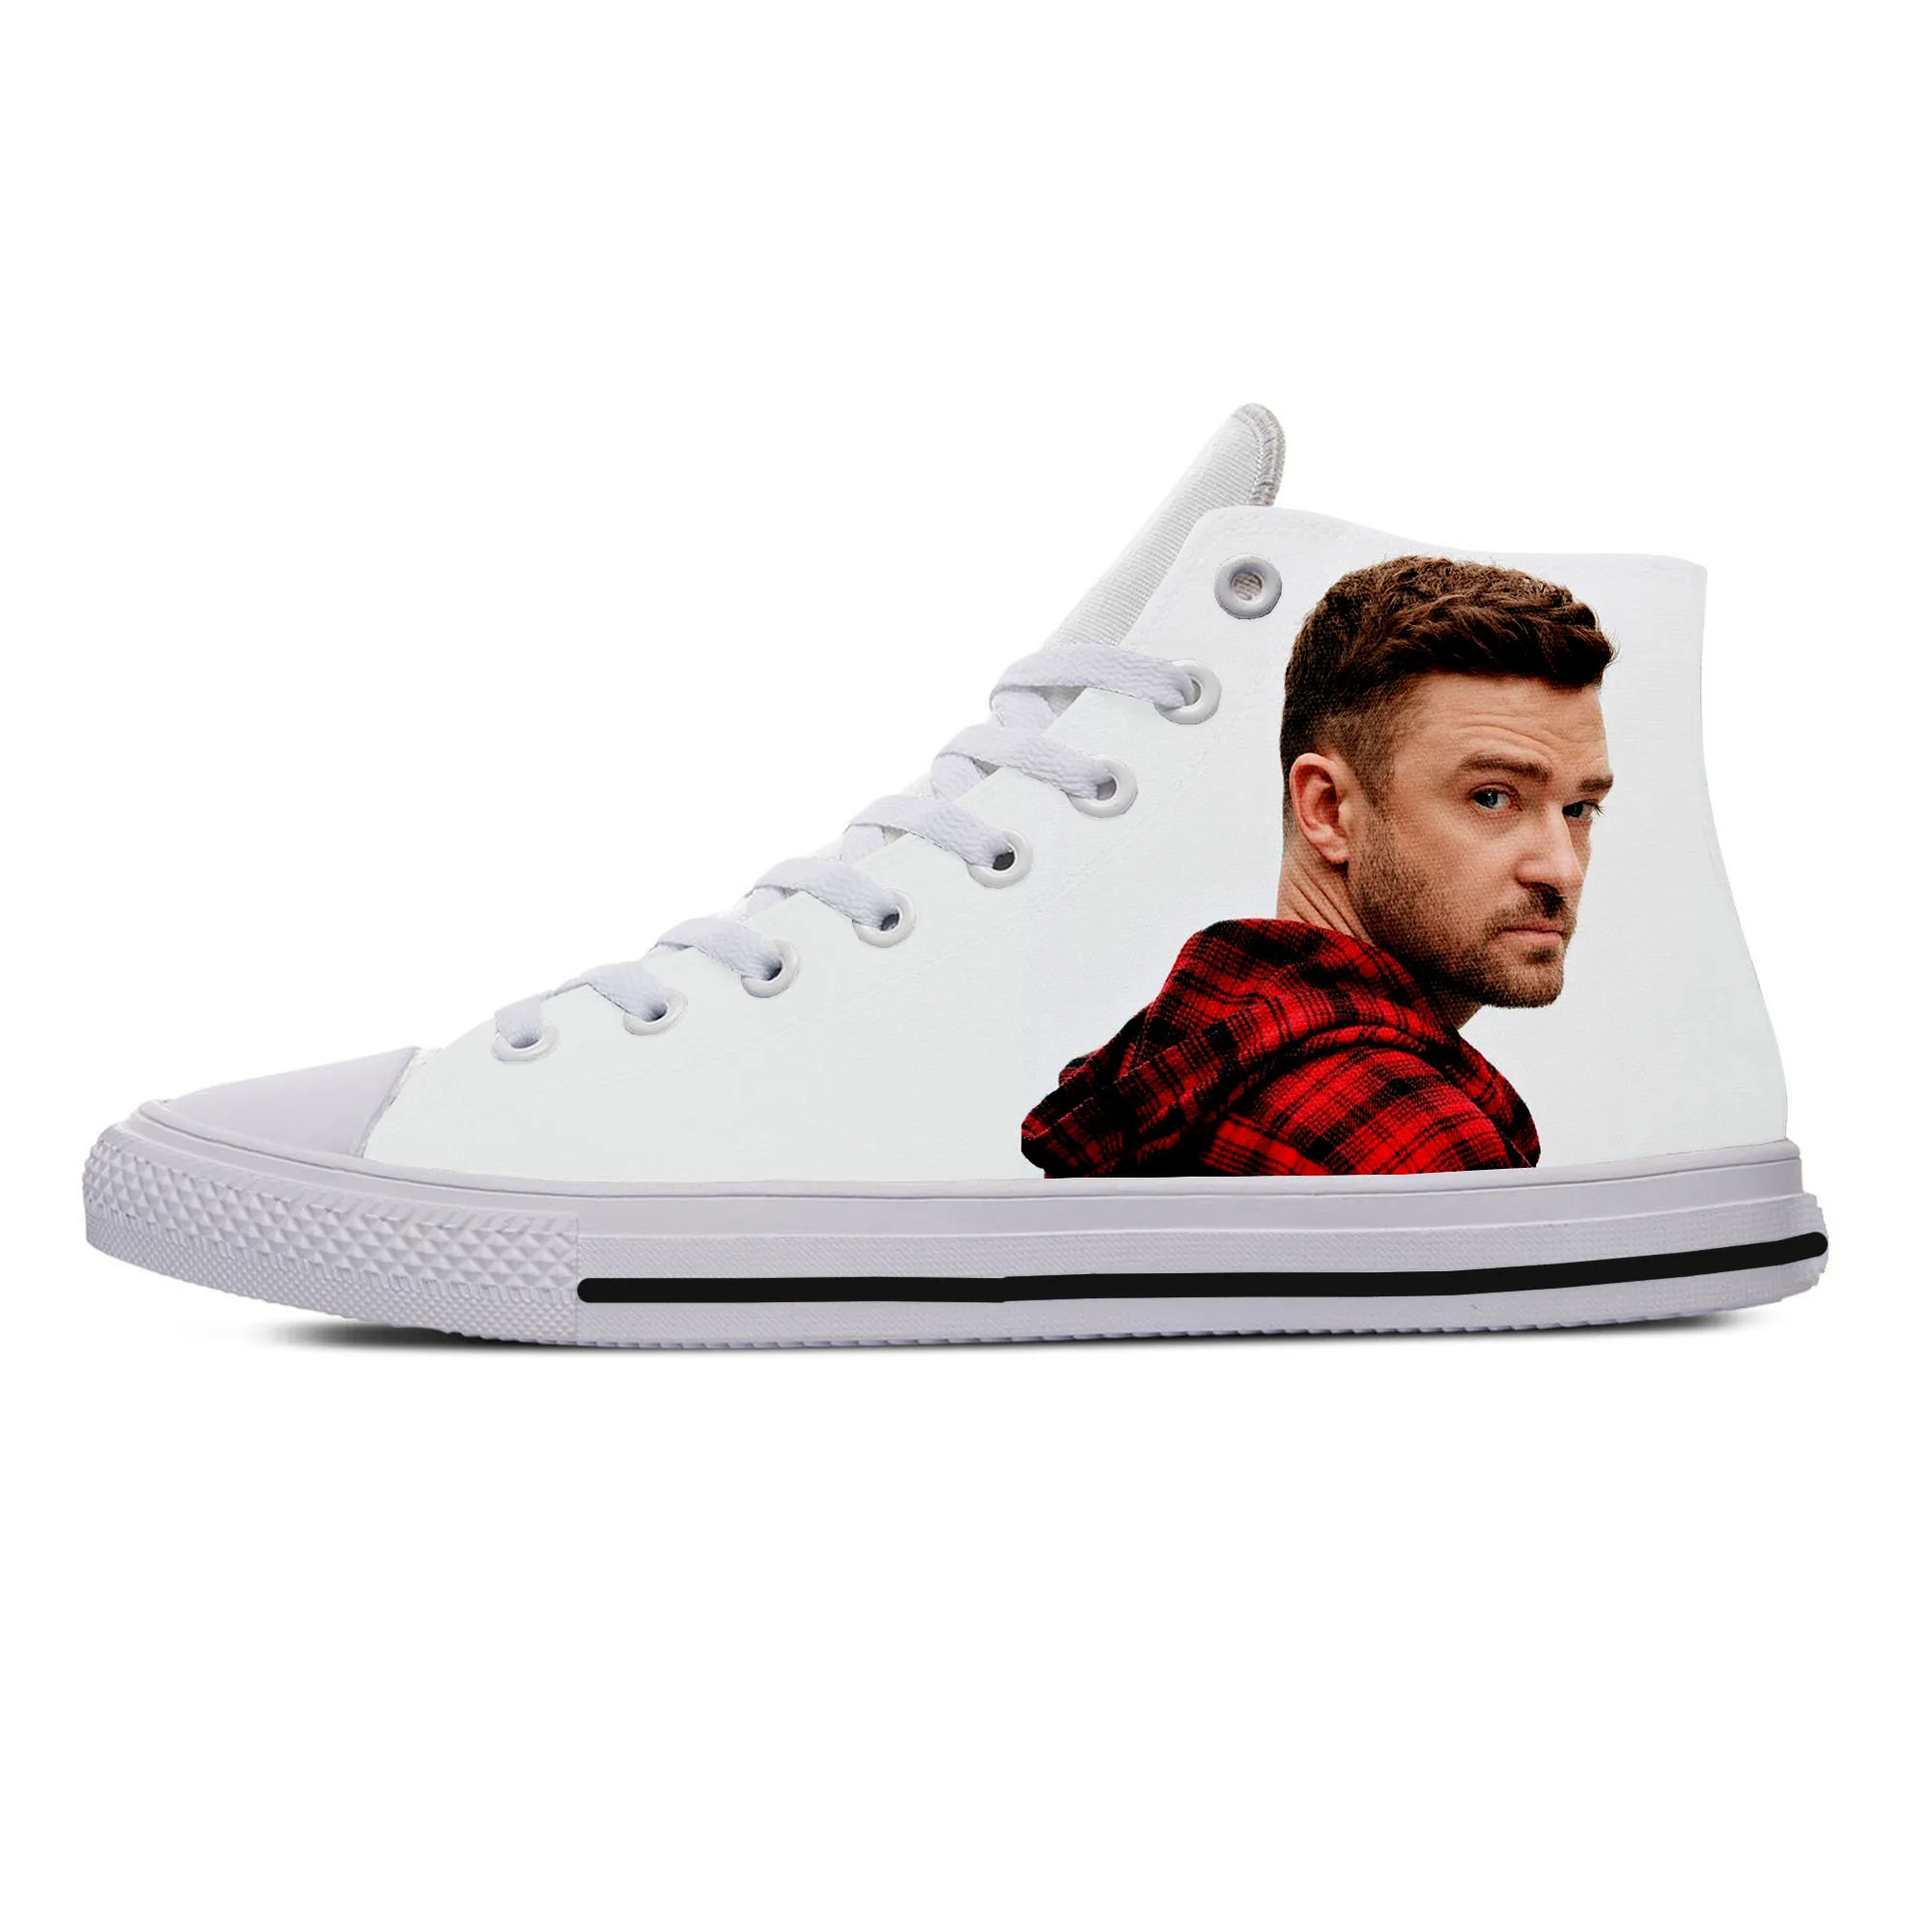 

Hot Summer Fashion Justin Timberlake High Sneakers Men Women High Quality Handiness Casual Shoes Lightweight Latest Board Shoes